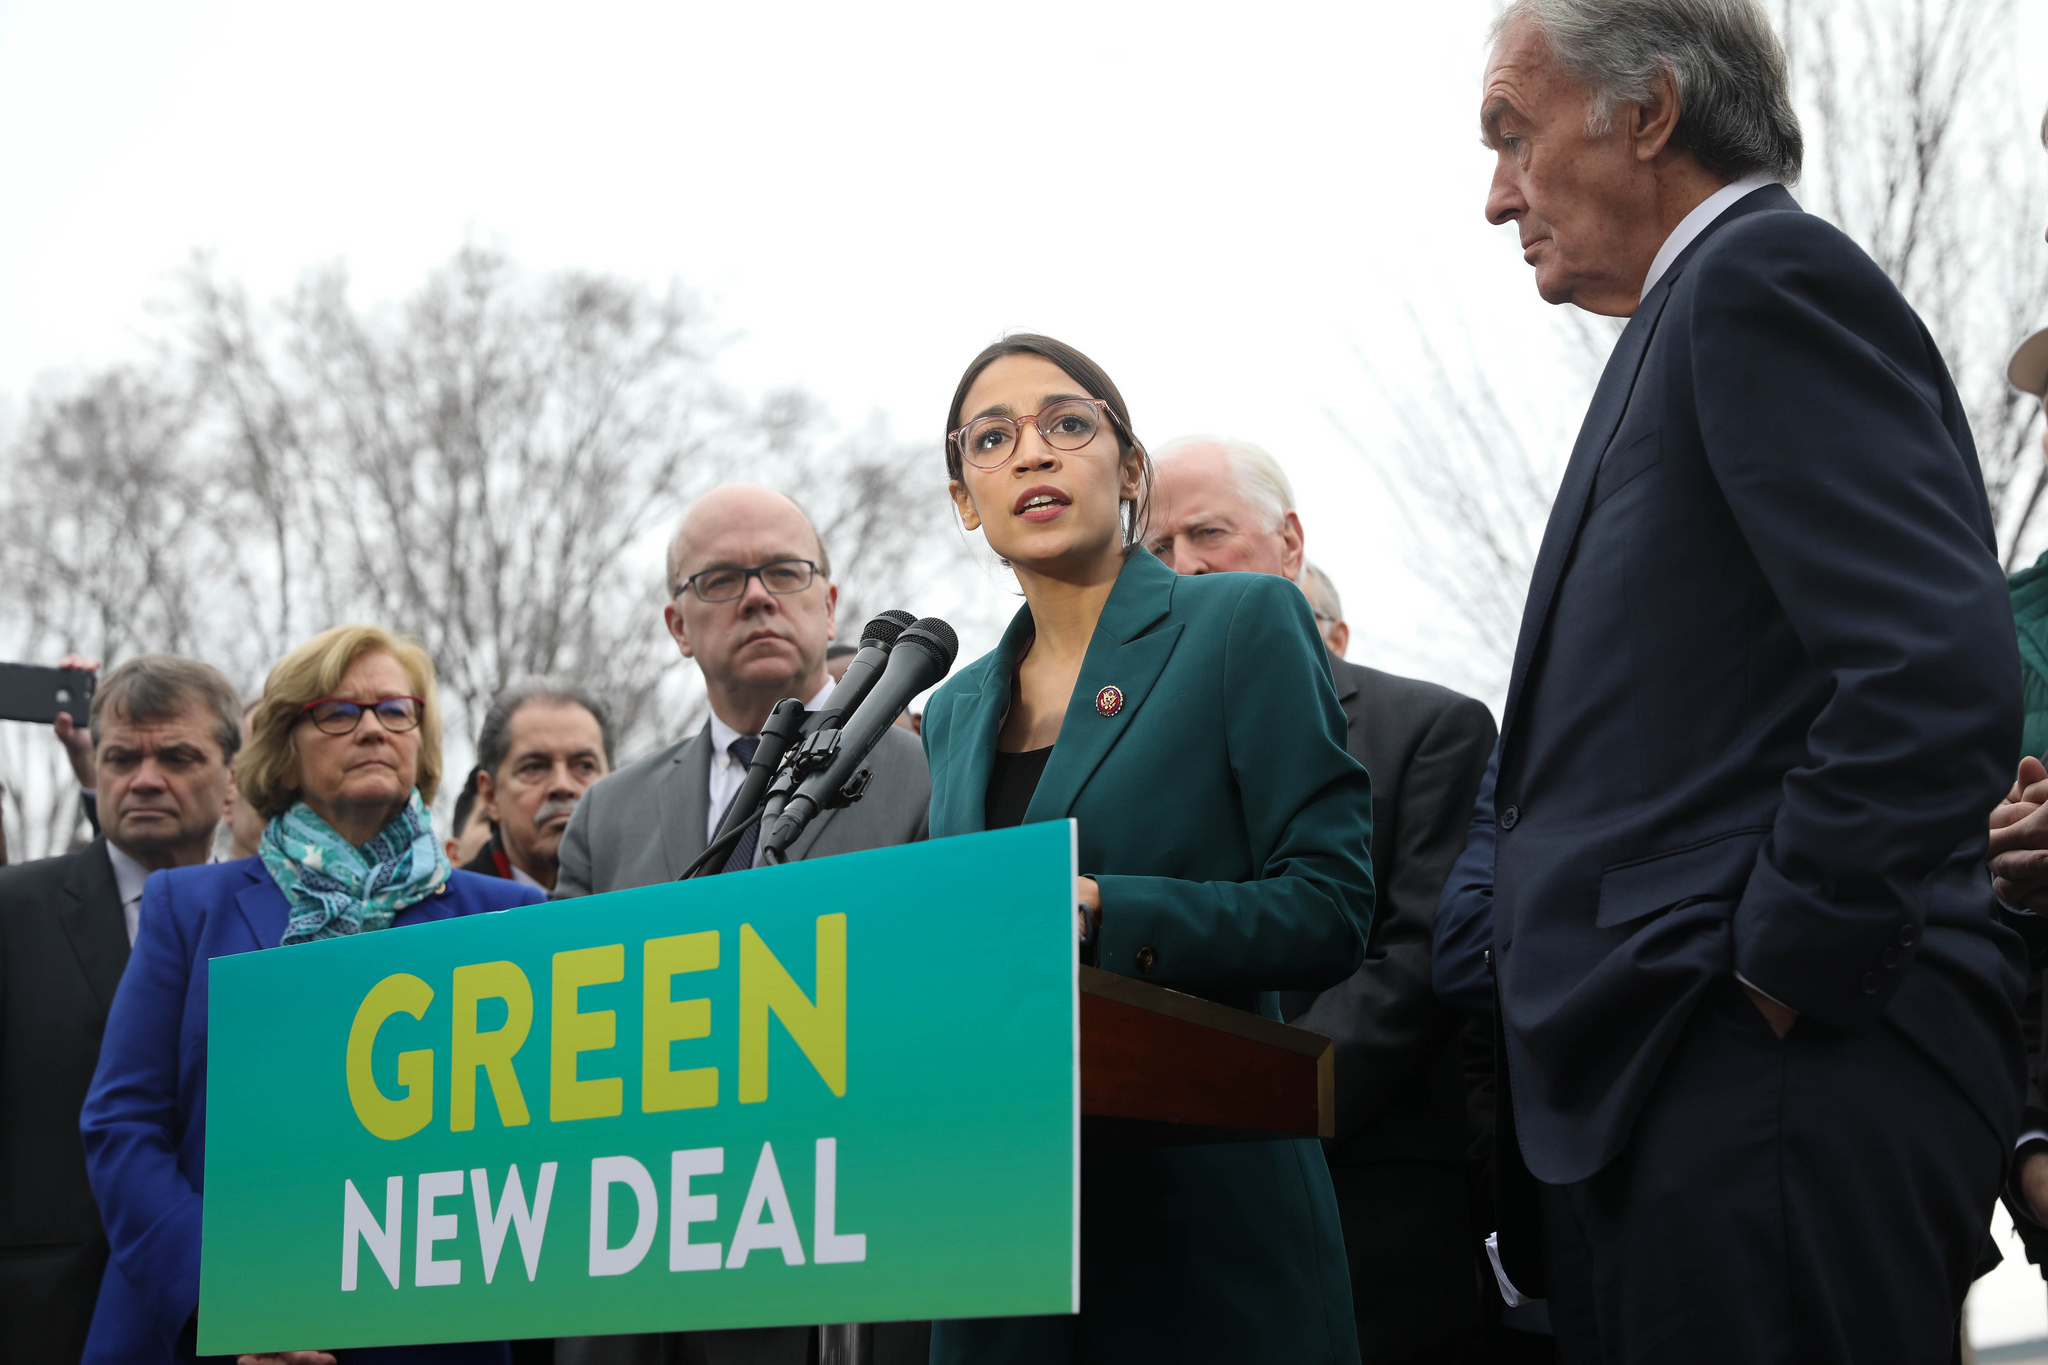 Rep. Alexandria Ocasio-Cortez (D-NY) and Sen. Edward Markey (D-MA) at a press conference introducing a resolution calling for a Green New Deal, February 7, 2019.